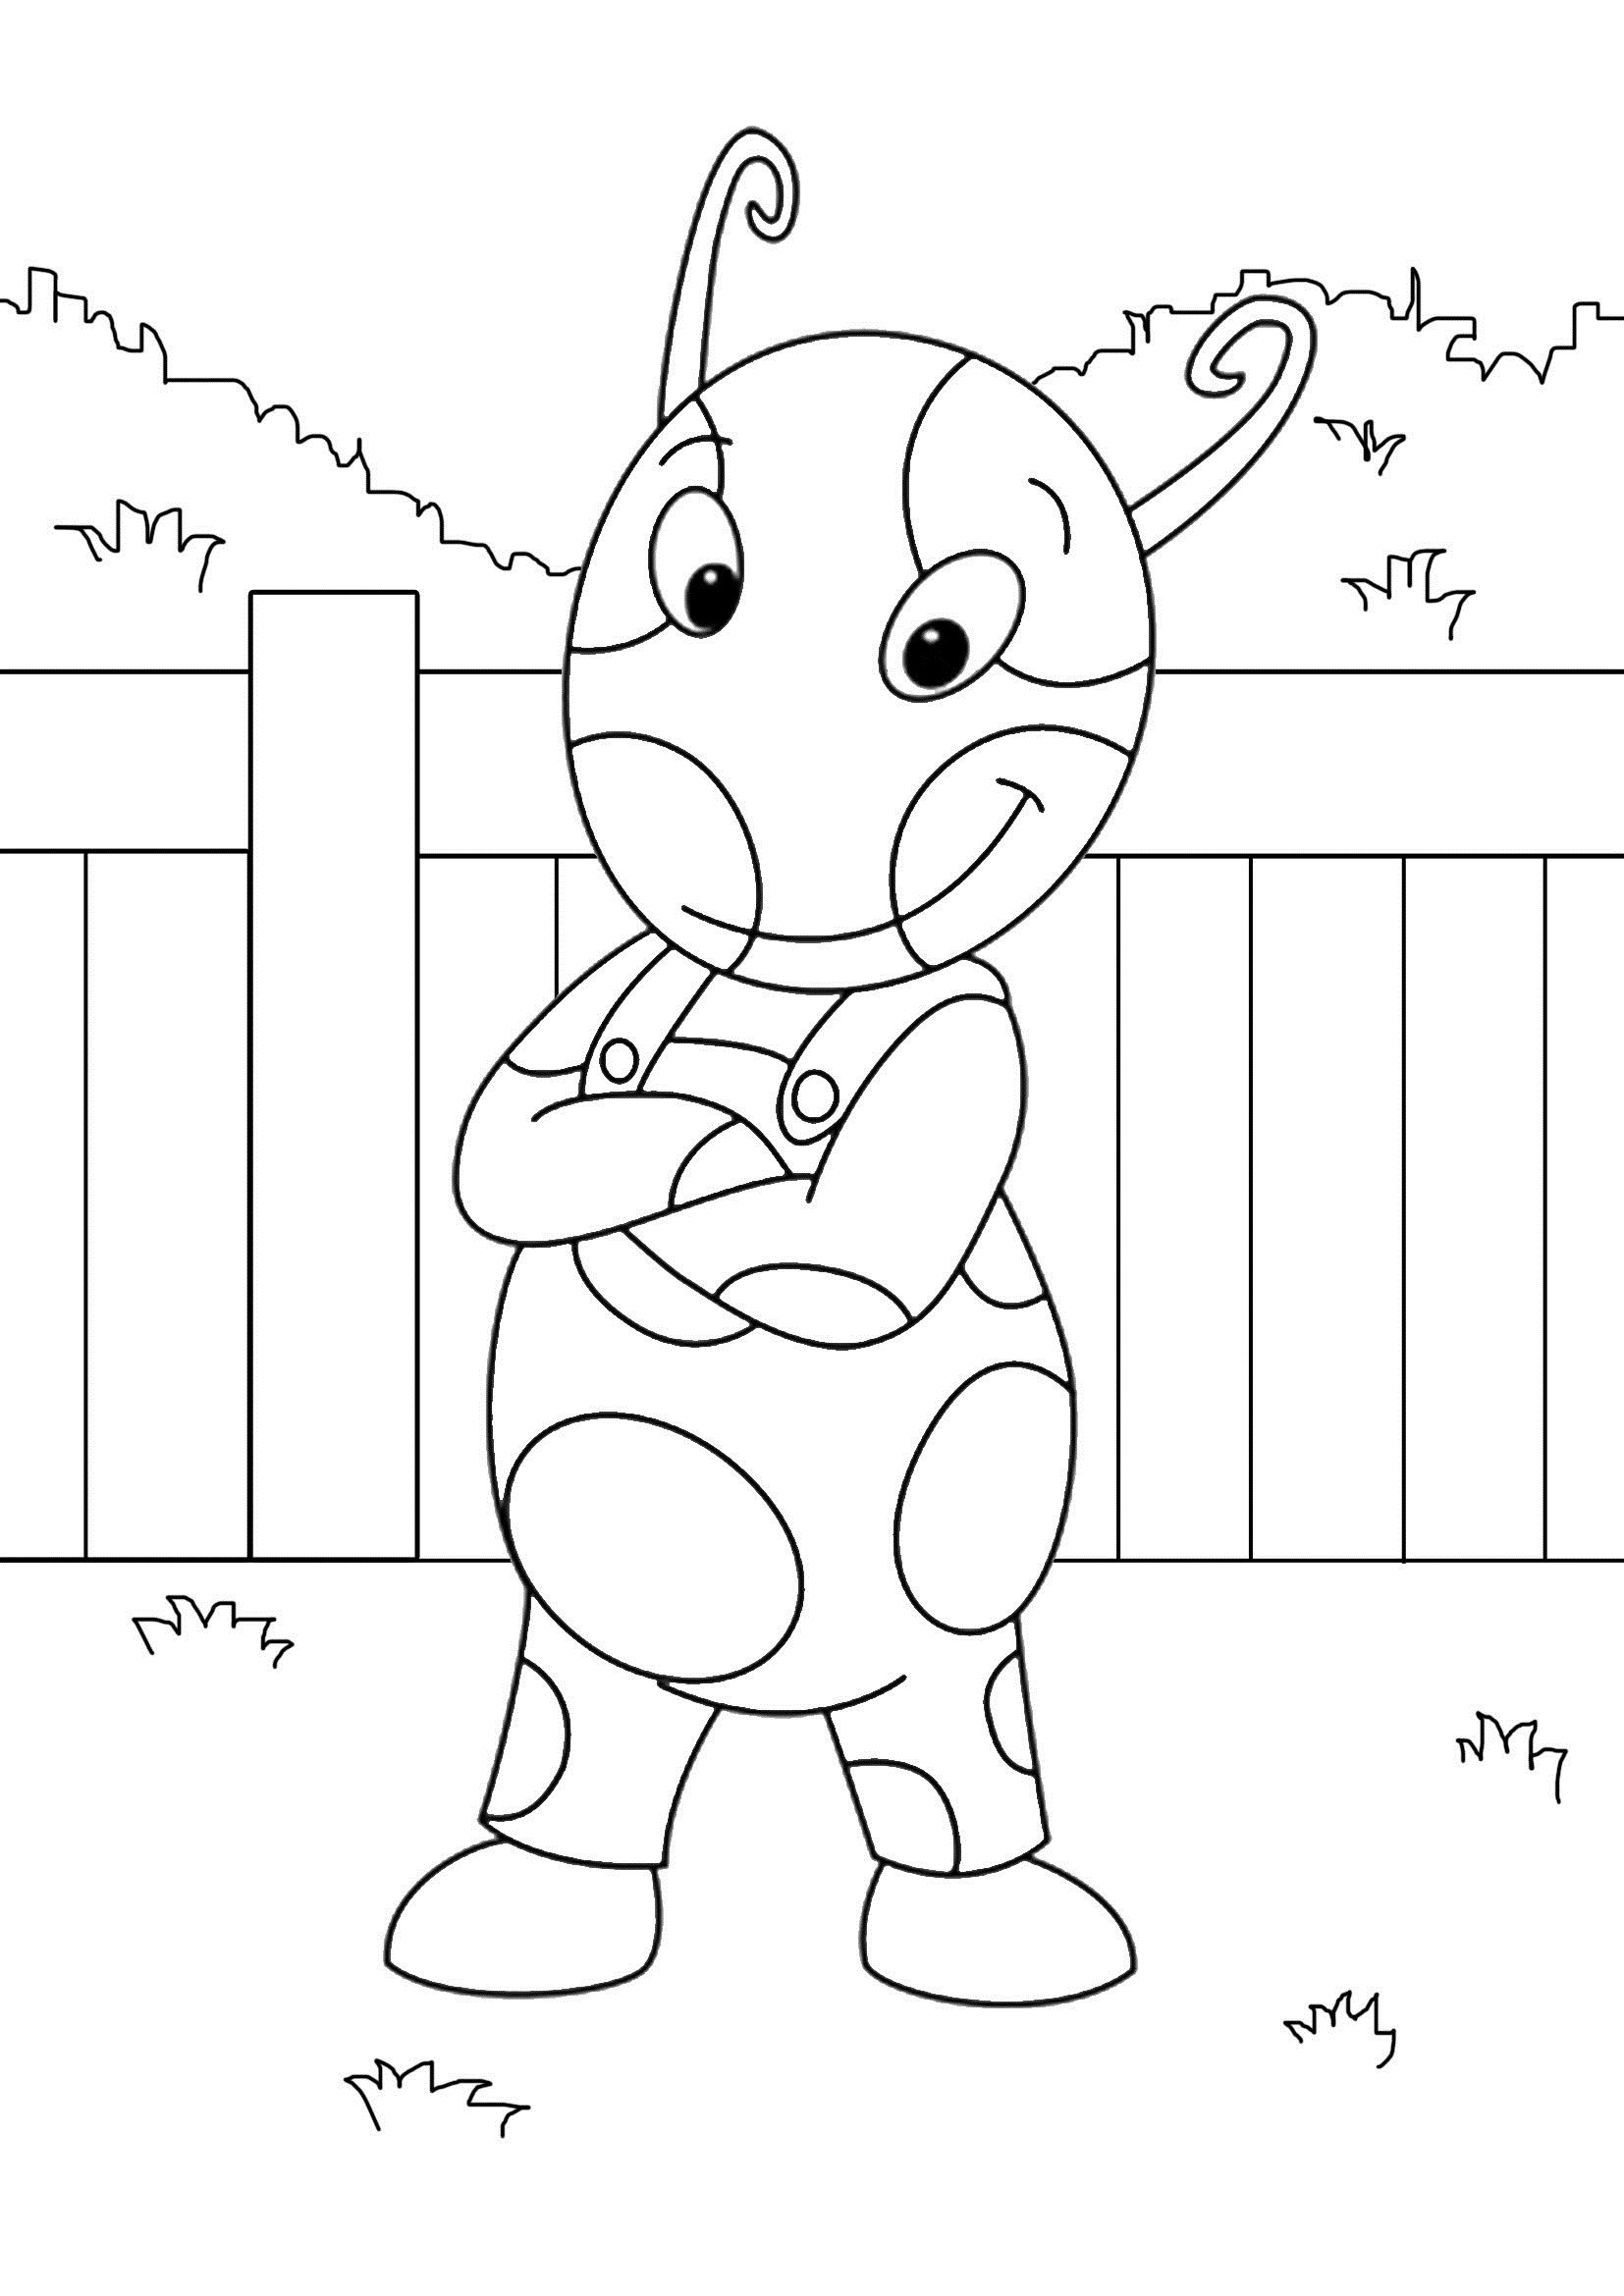 Free Printable Coloring Sheets For Toddlers
 Free Printable Backyardigans Coloring Pages For Kids